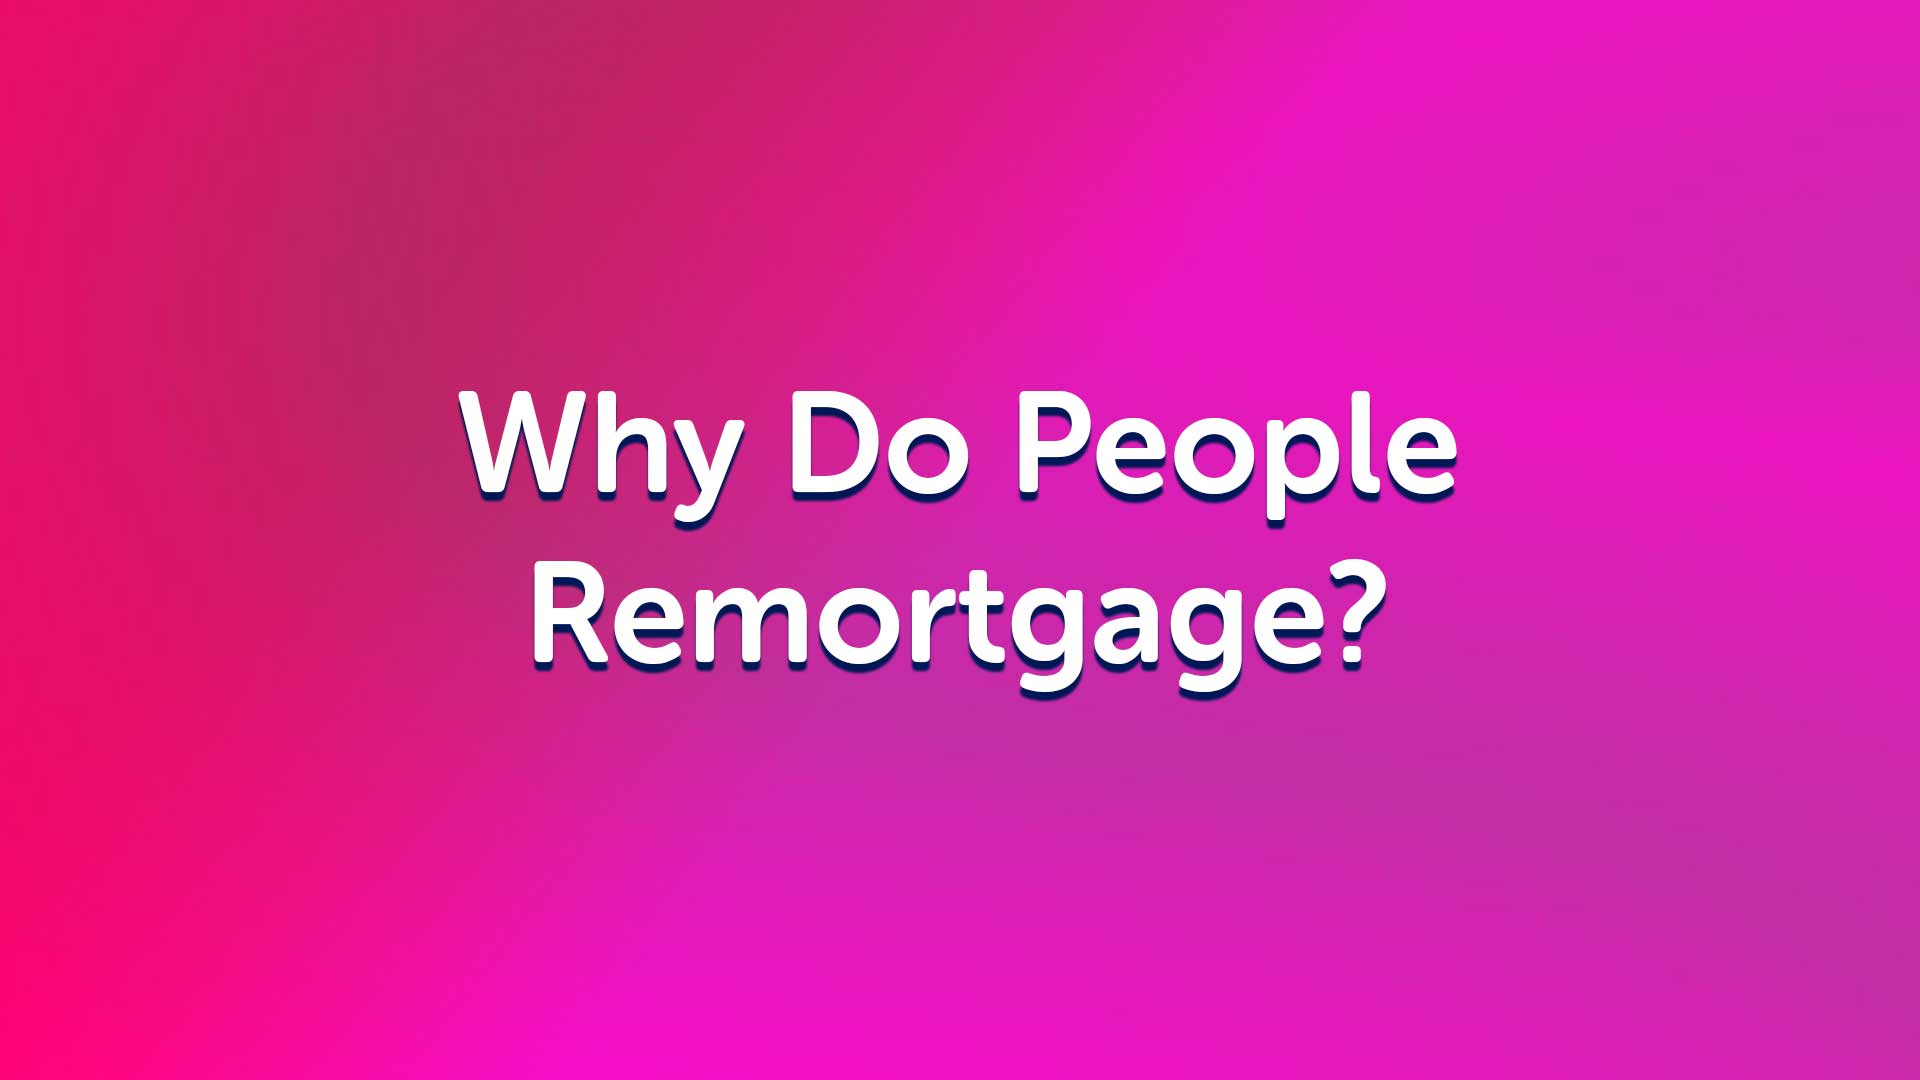 Why Do People Remortgage? | Remortgage Advice | Remortgage to Release Equity | UK Moneyman